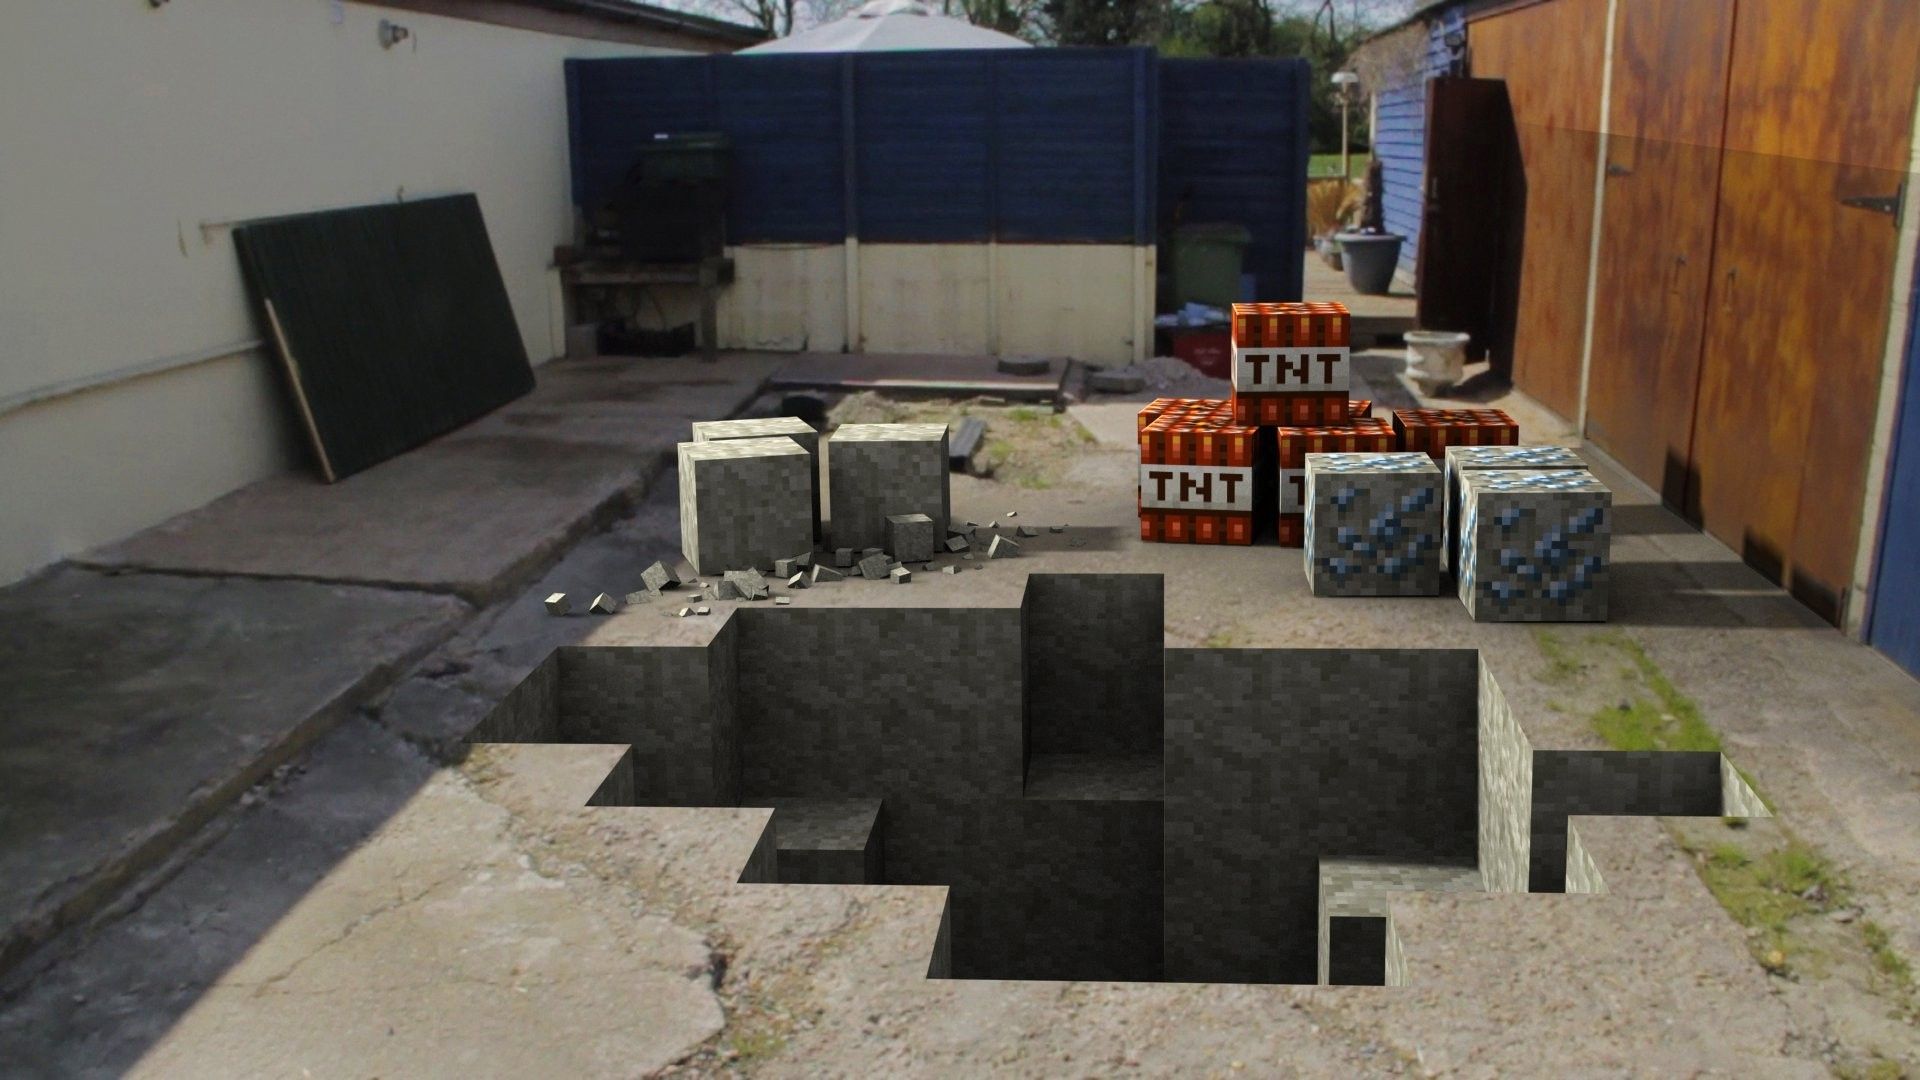 #video games, #Minecraft, #augmented reality wallpaper